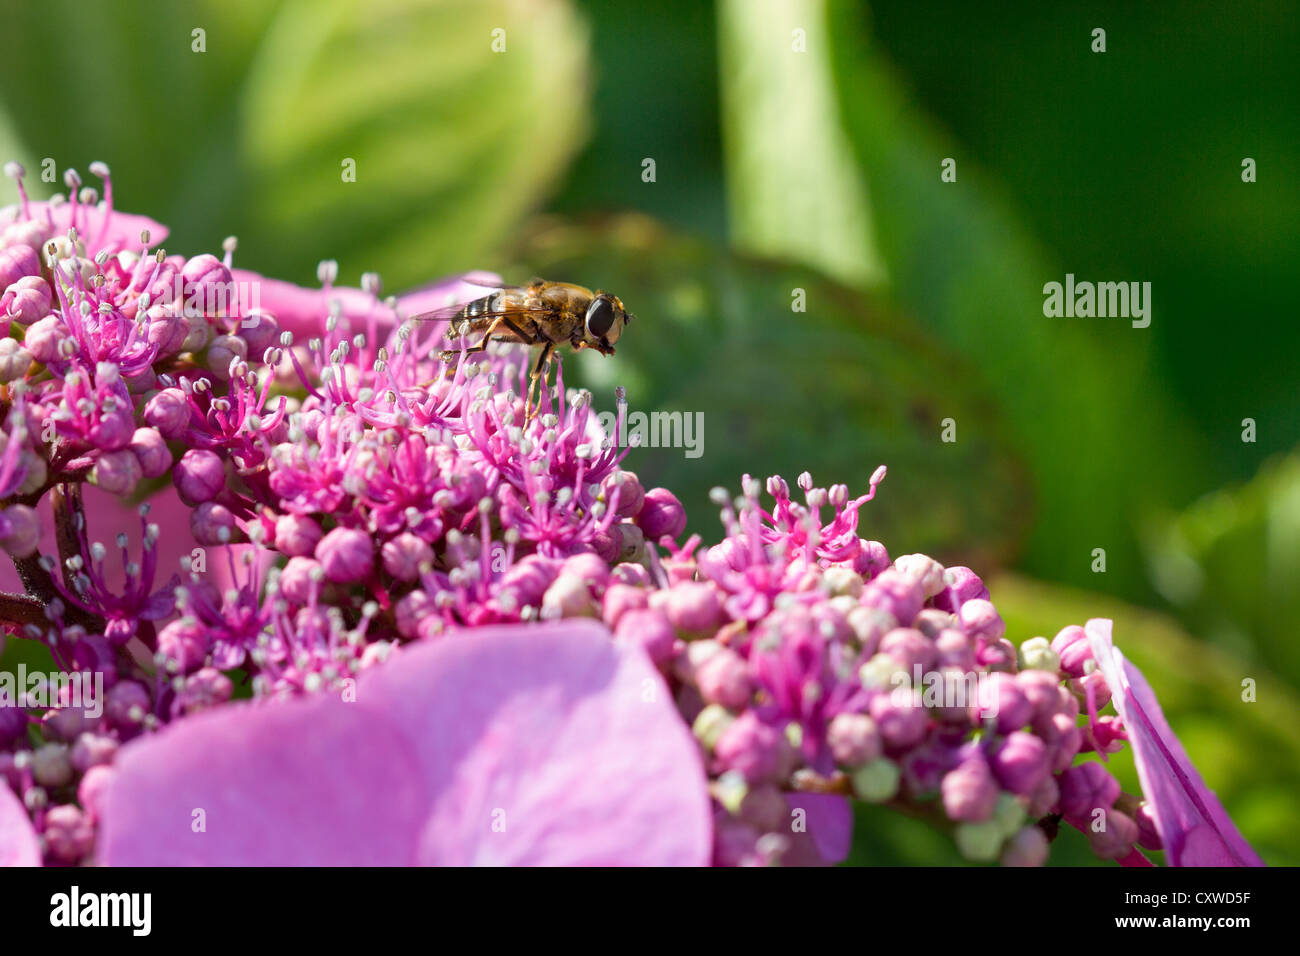 bees gathering nectar from Mauve/ Pink Hydrangea. Stock Photo